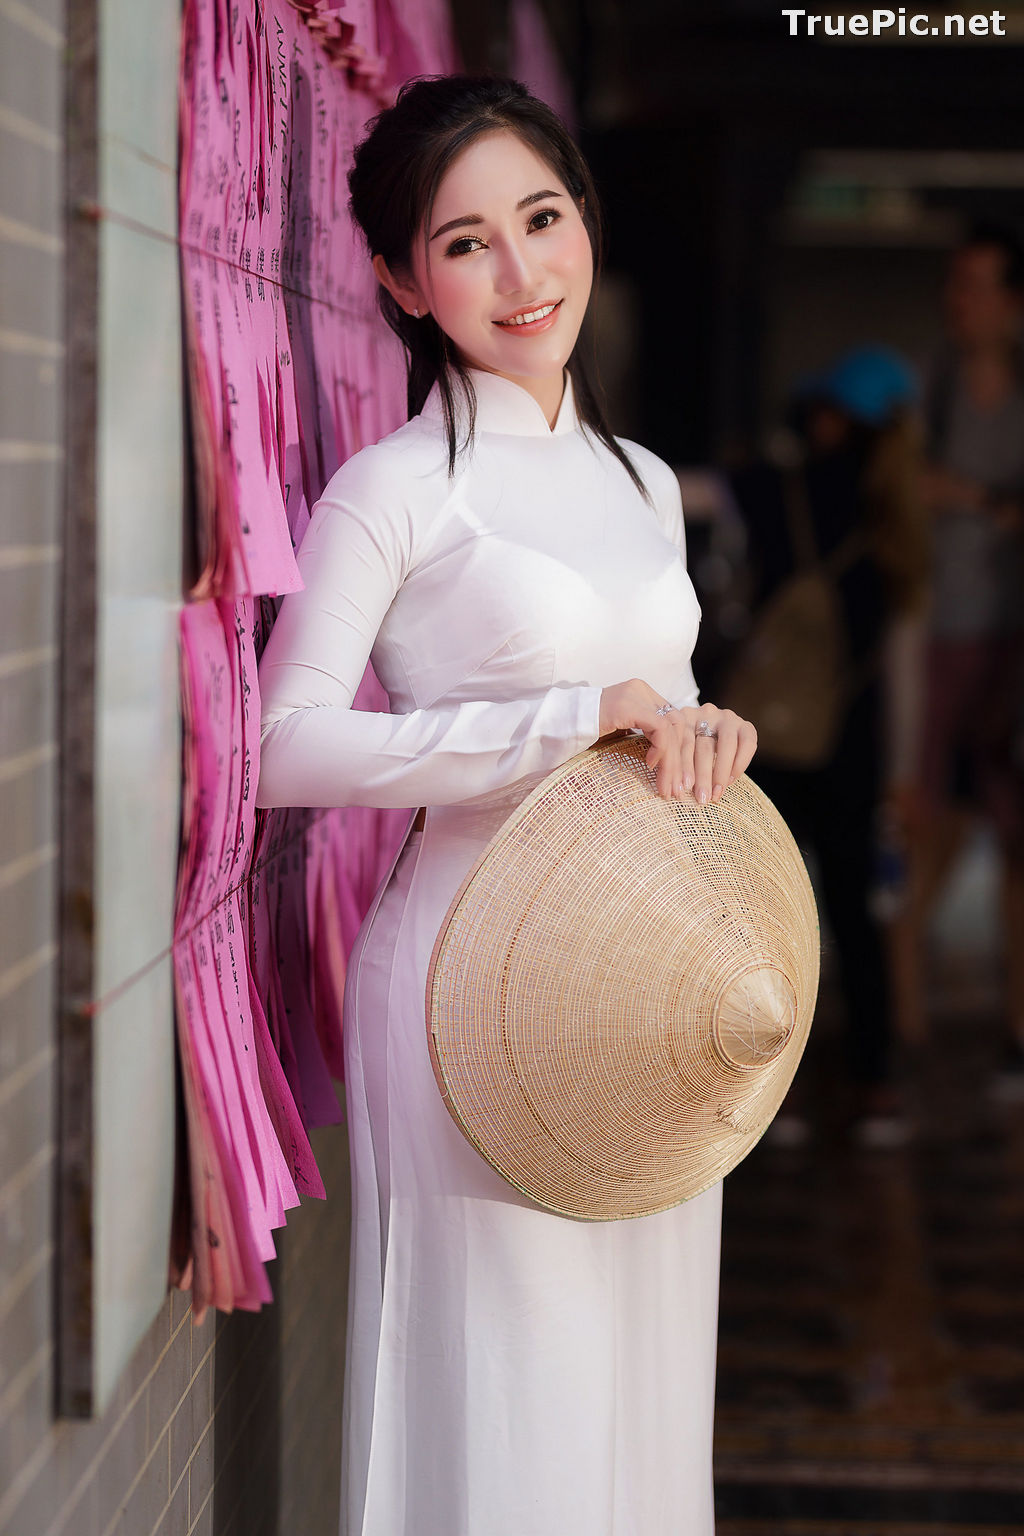 Image The Beauty of Vietnamese Girls with Traditional Dress (Ao Dai) #2 - TruePic.net - Picture-84